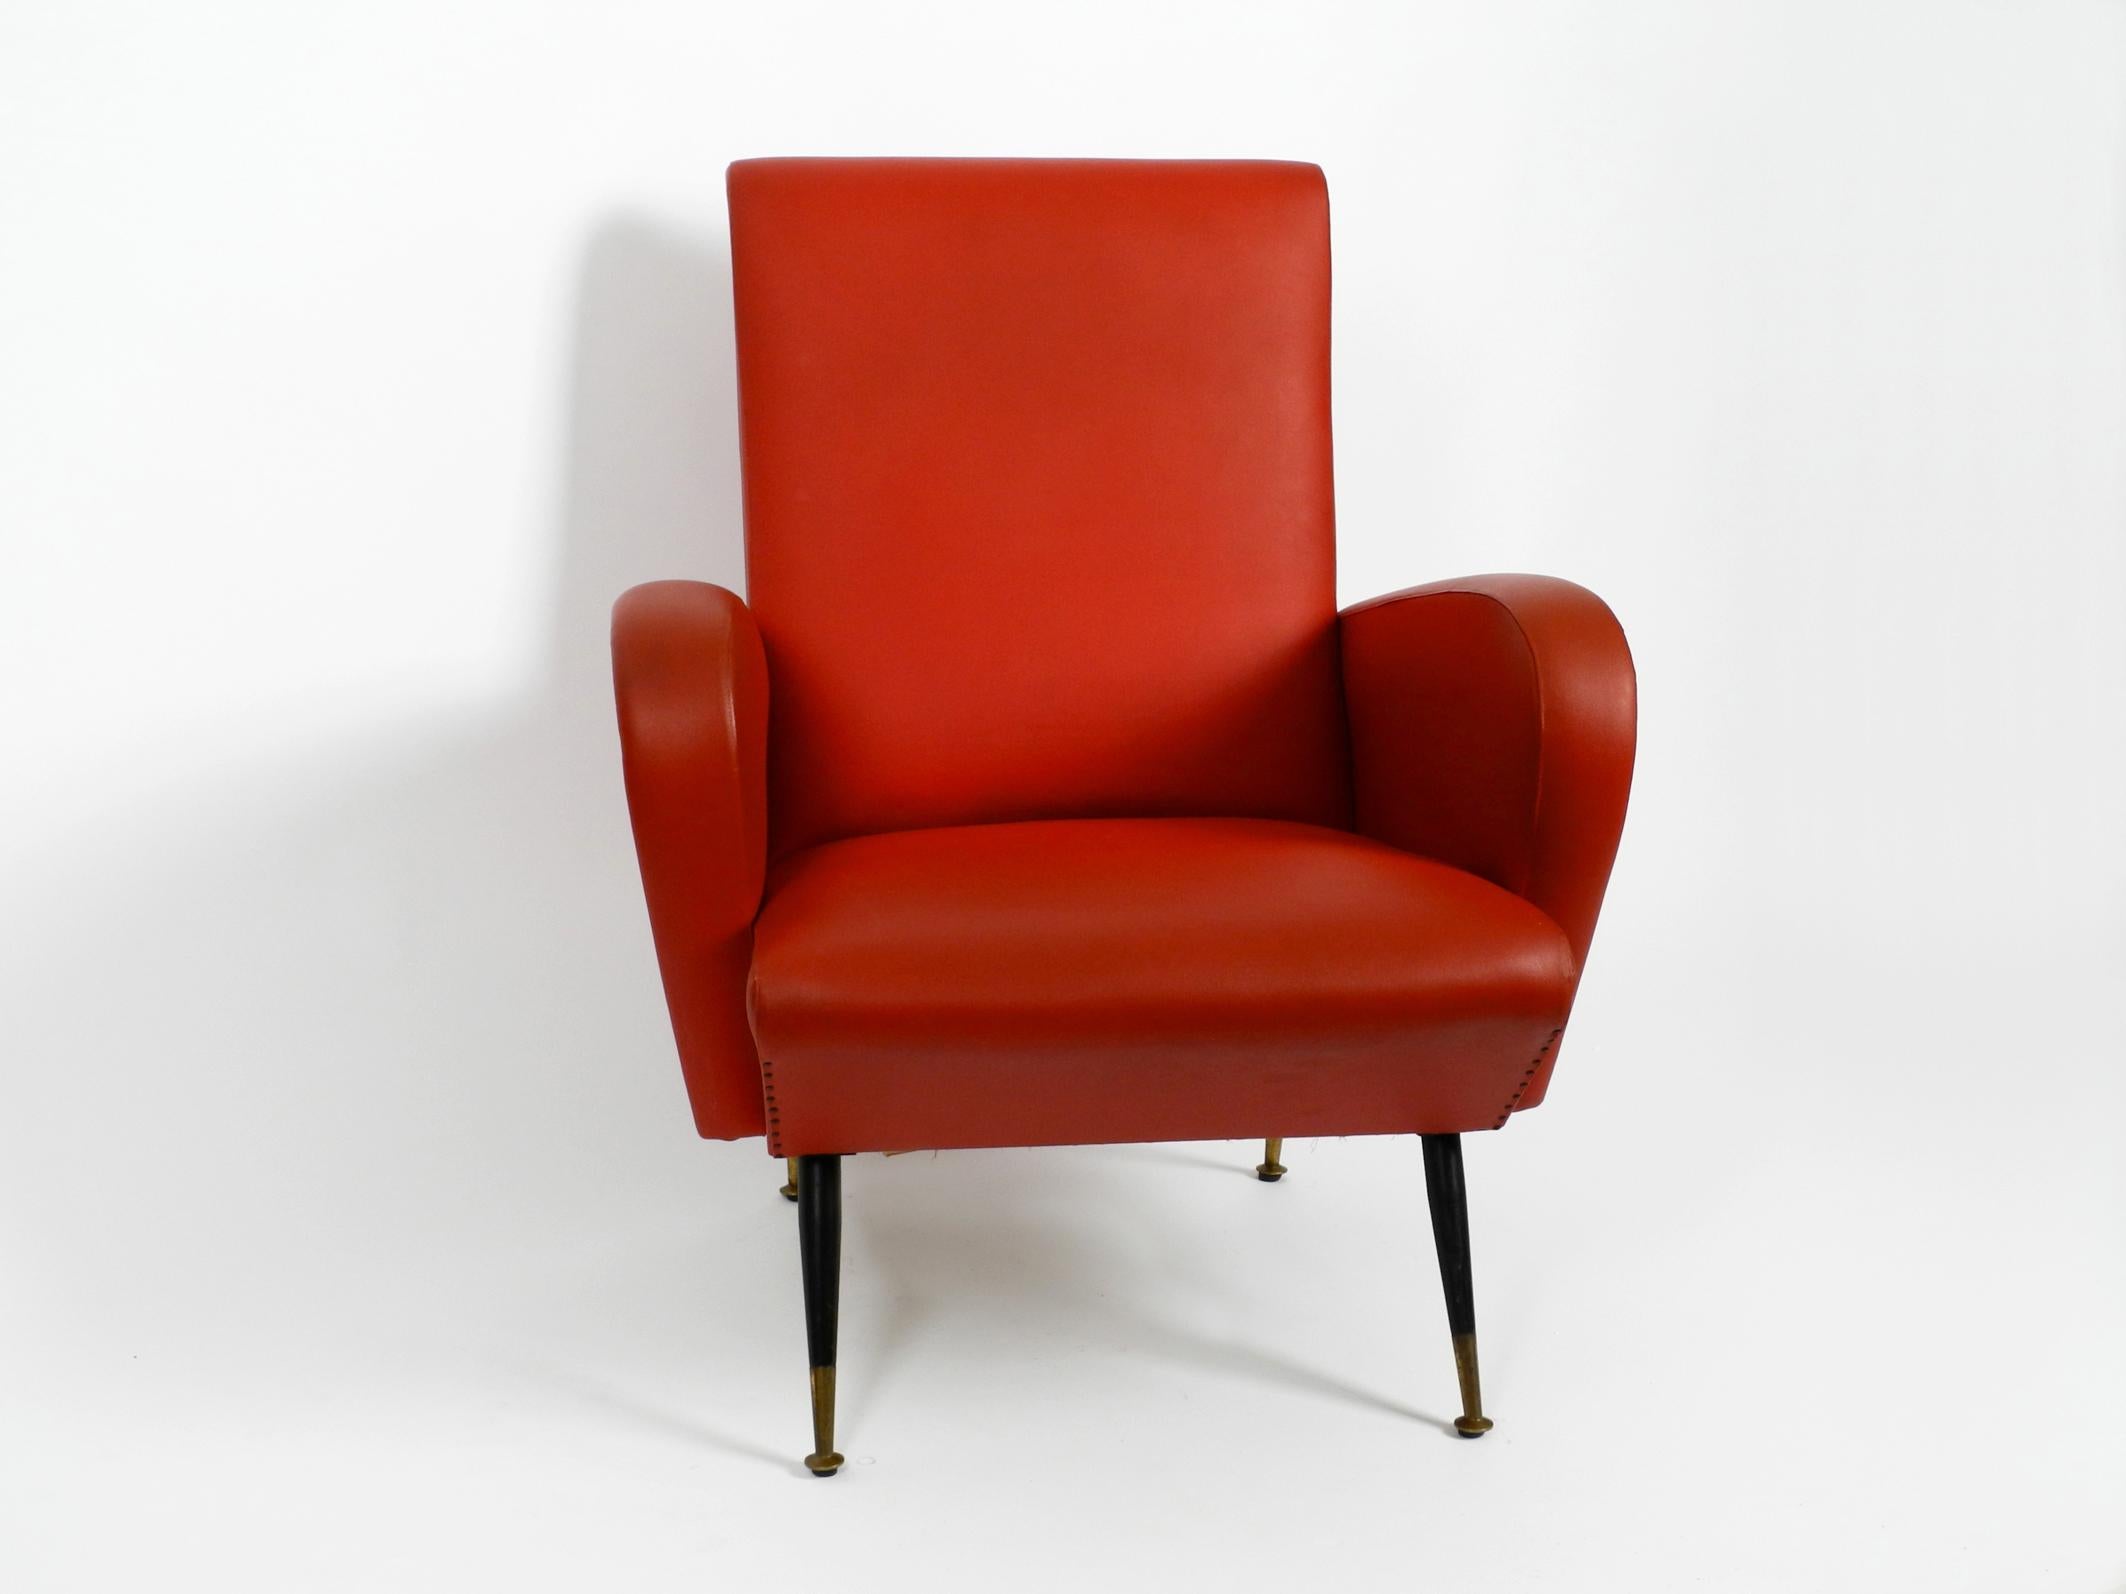 Mid-20th Century Italian Midcentury Lounge Chair with Red Original Faux Leather Cover